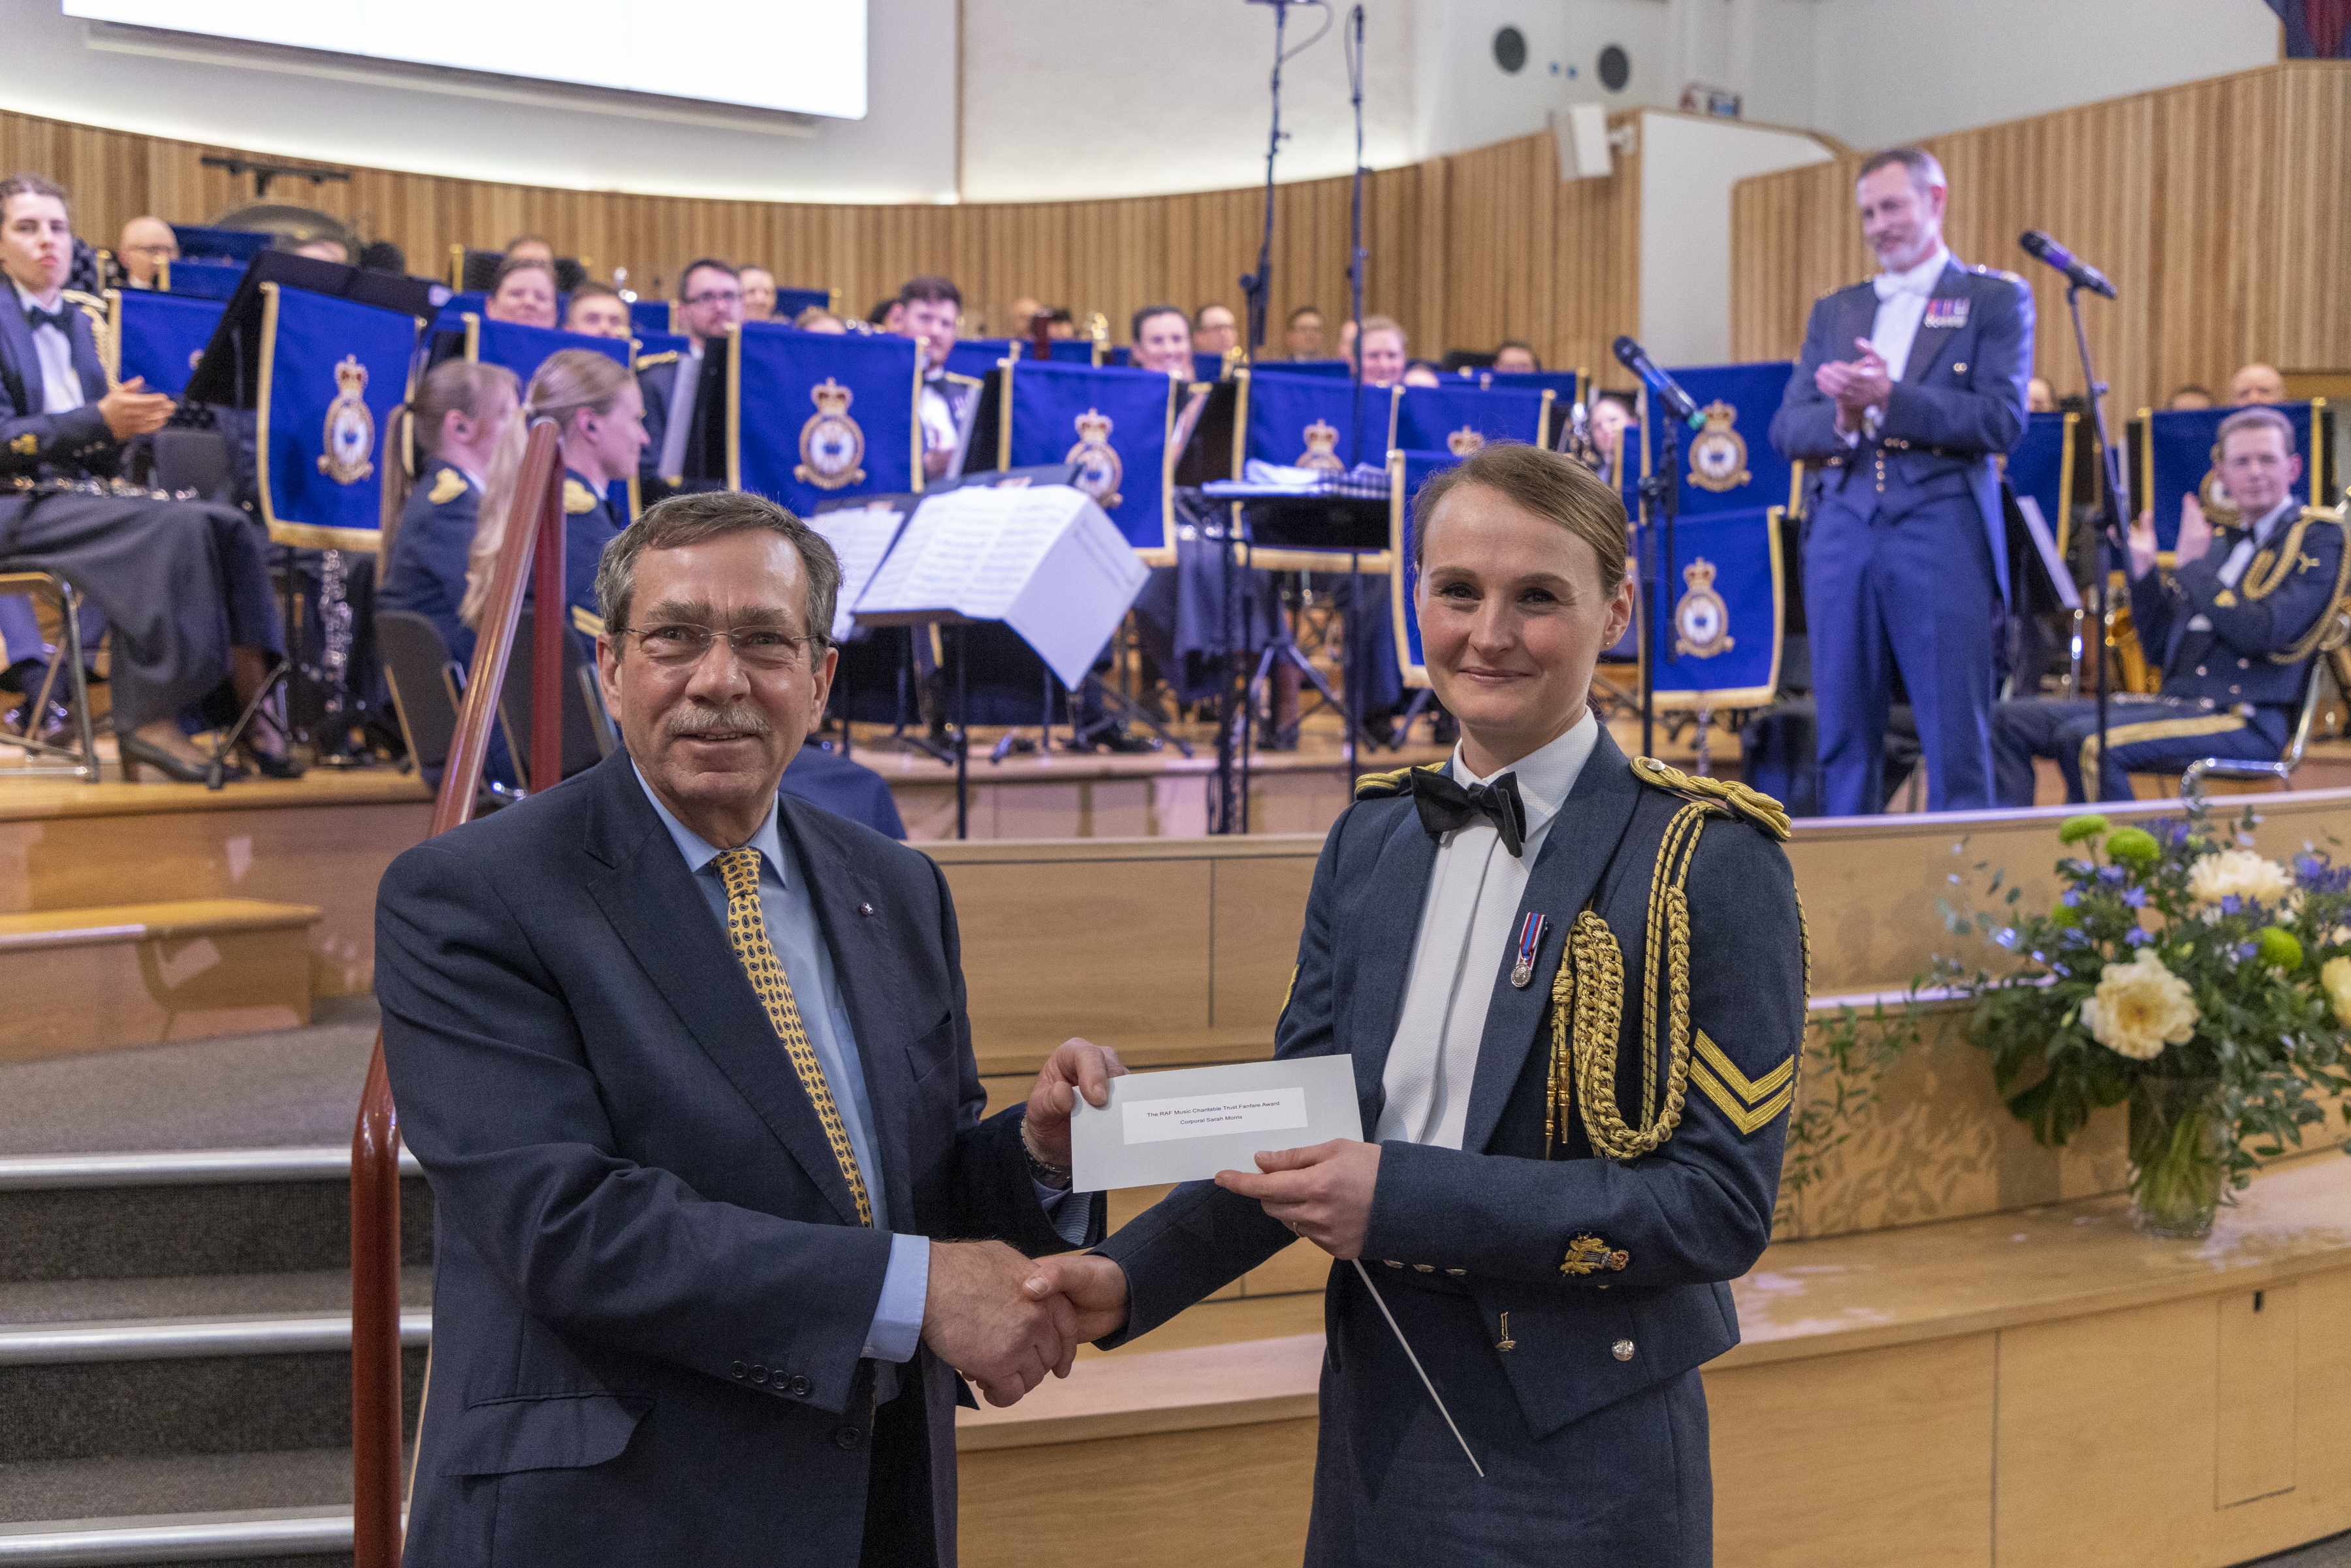 Malcolm Goodman MBE presenting Corporal Sarah Morris with the RAF Music Charitable Trust award for the best fanfare 